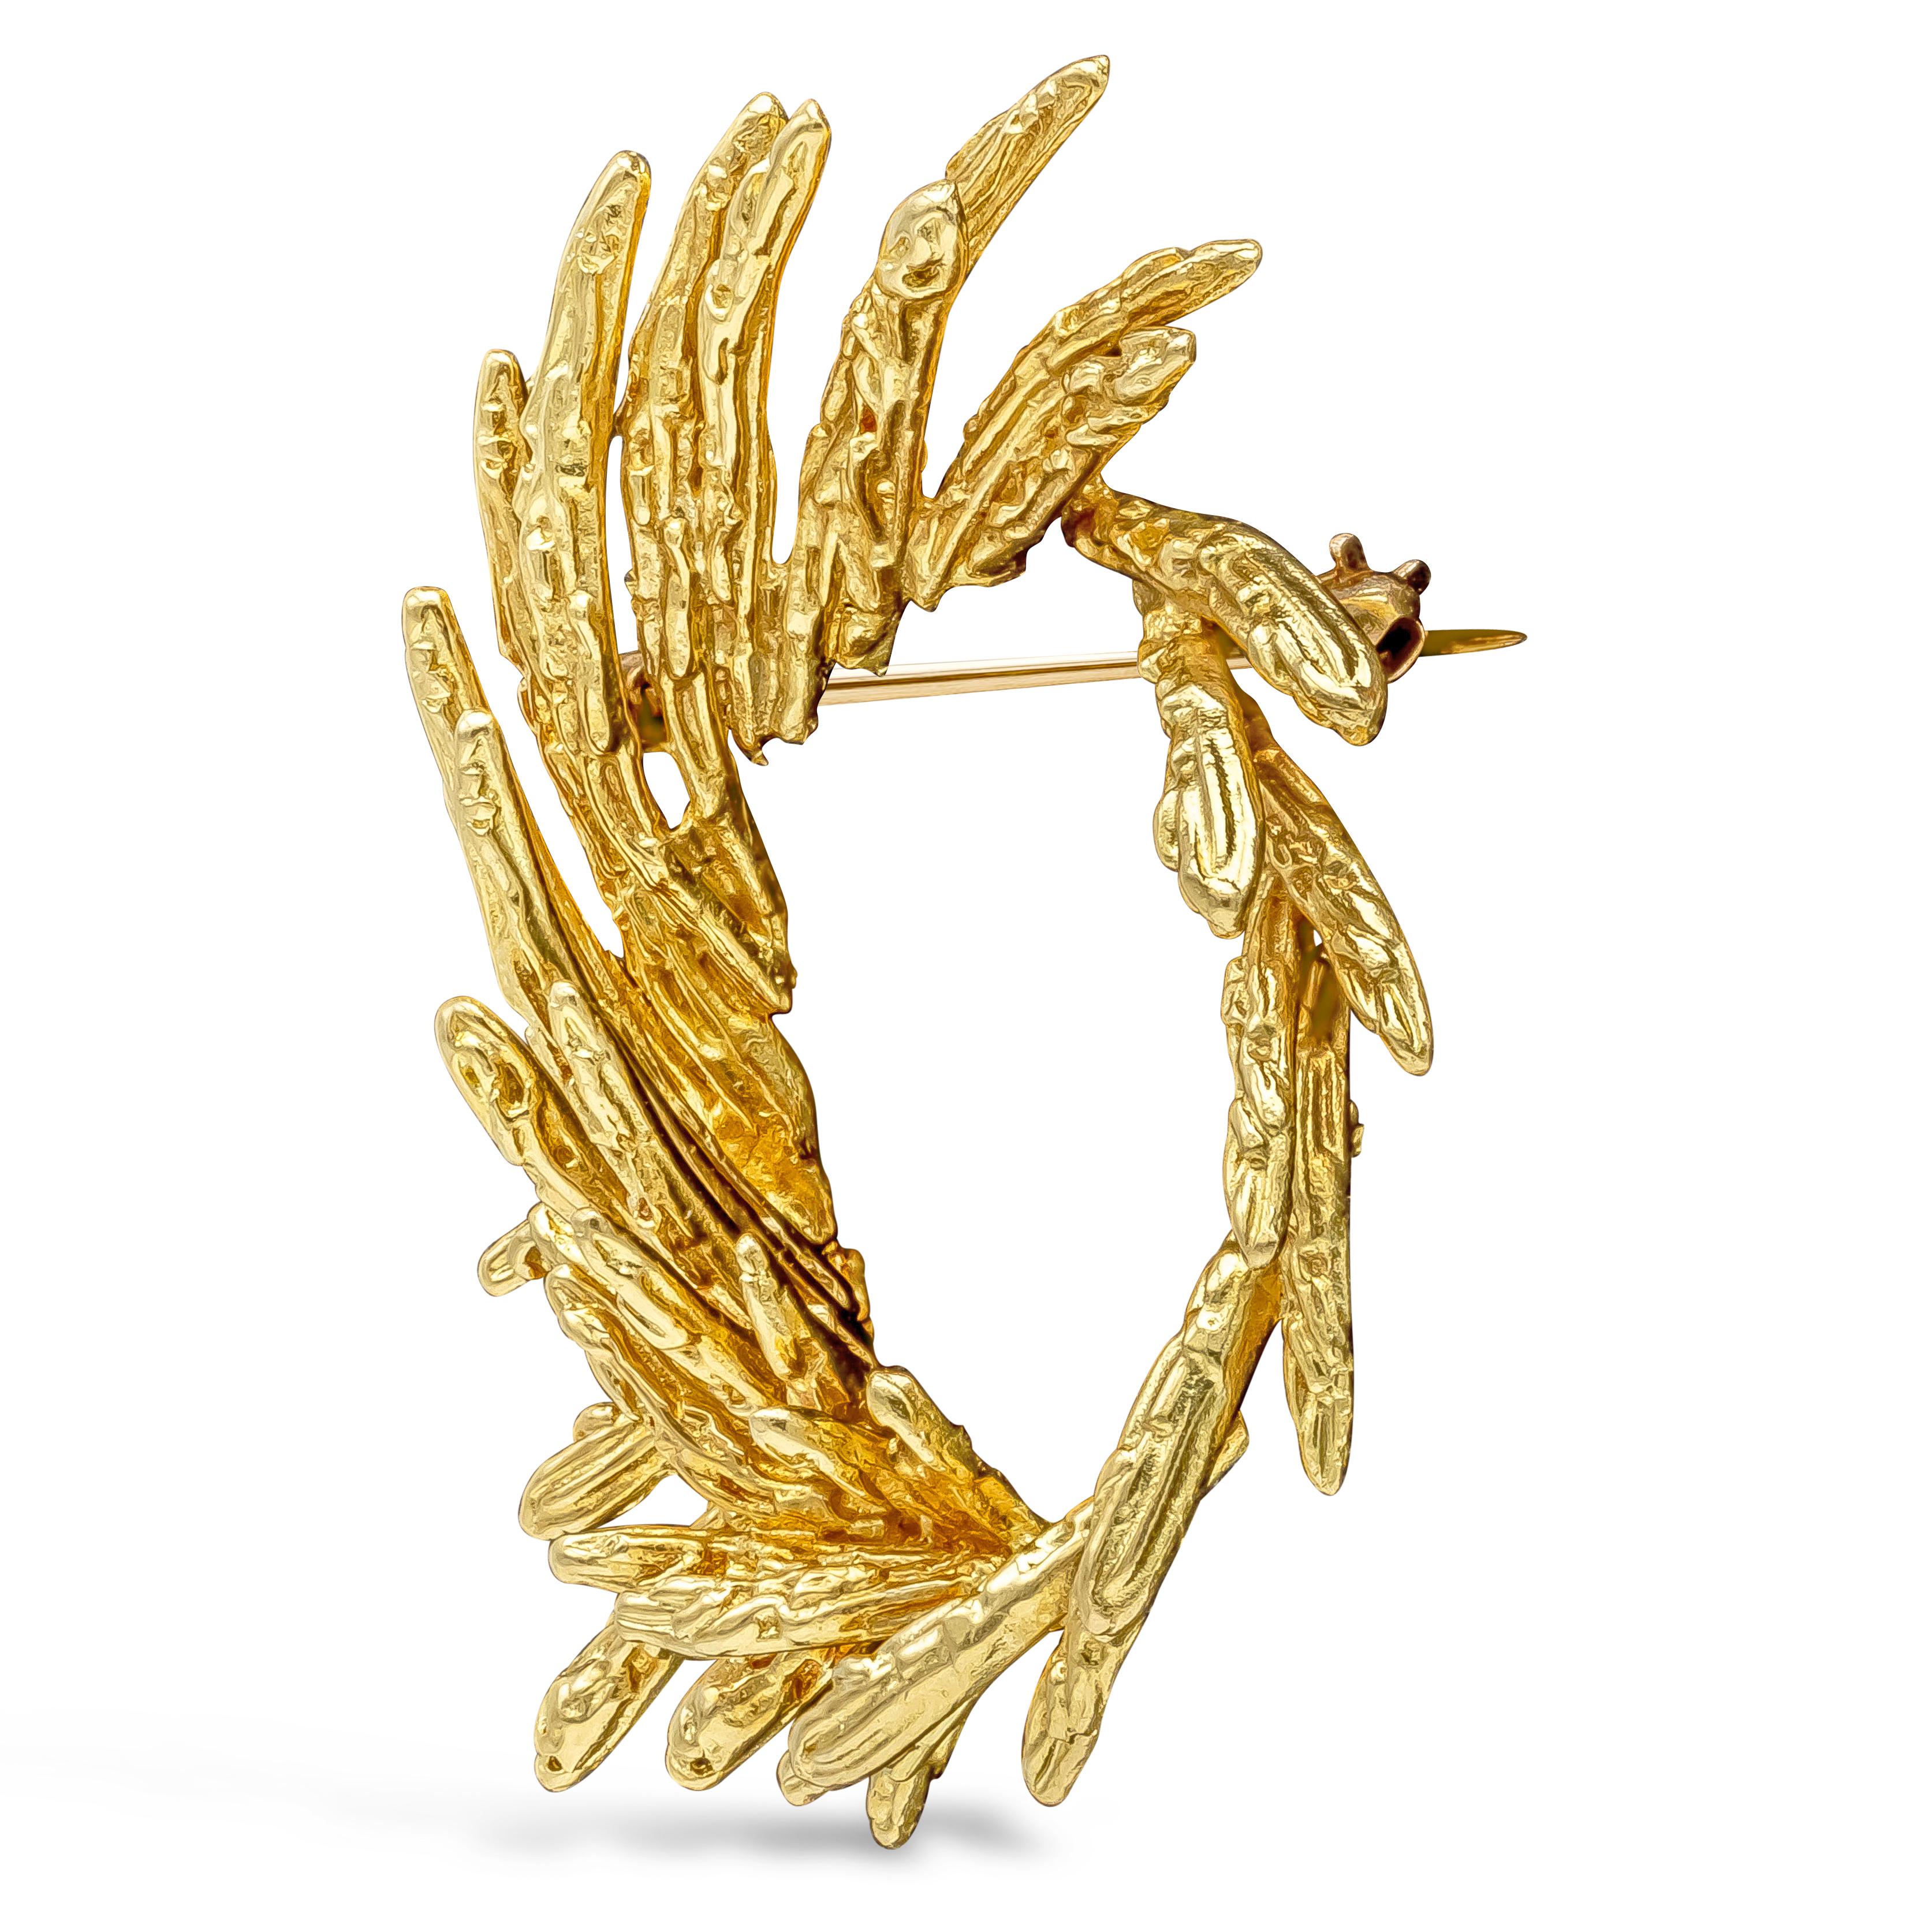 An antique wreath design brooch Made with 18K Yellow Gold. 31.50 Grams in Gold Weight